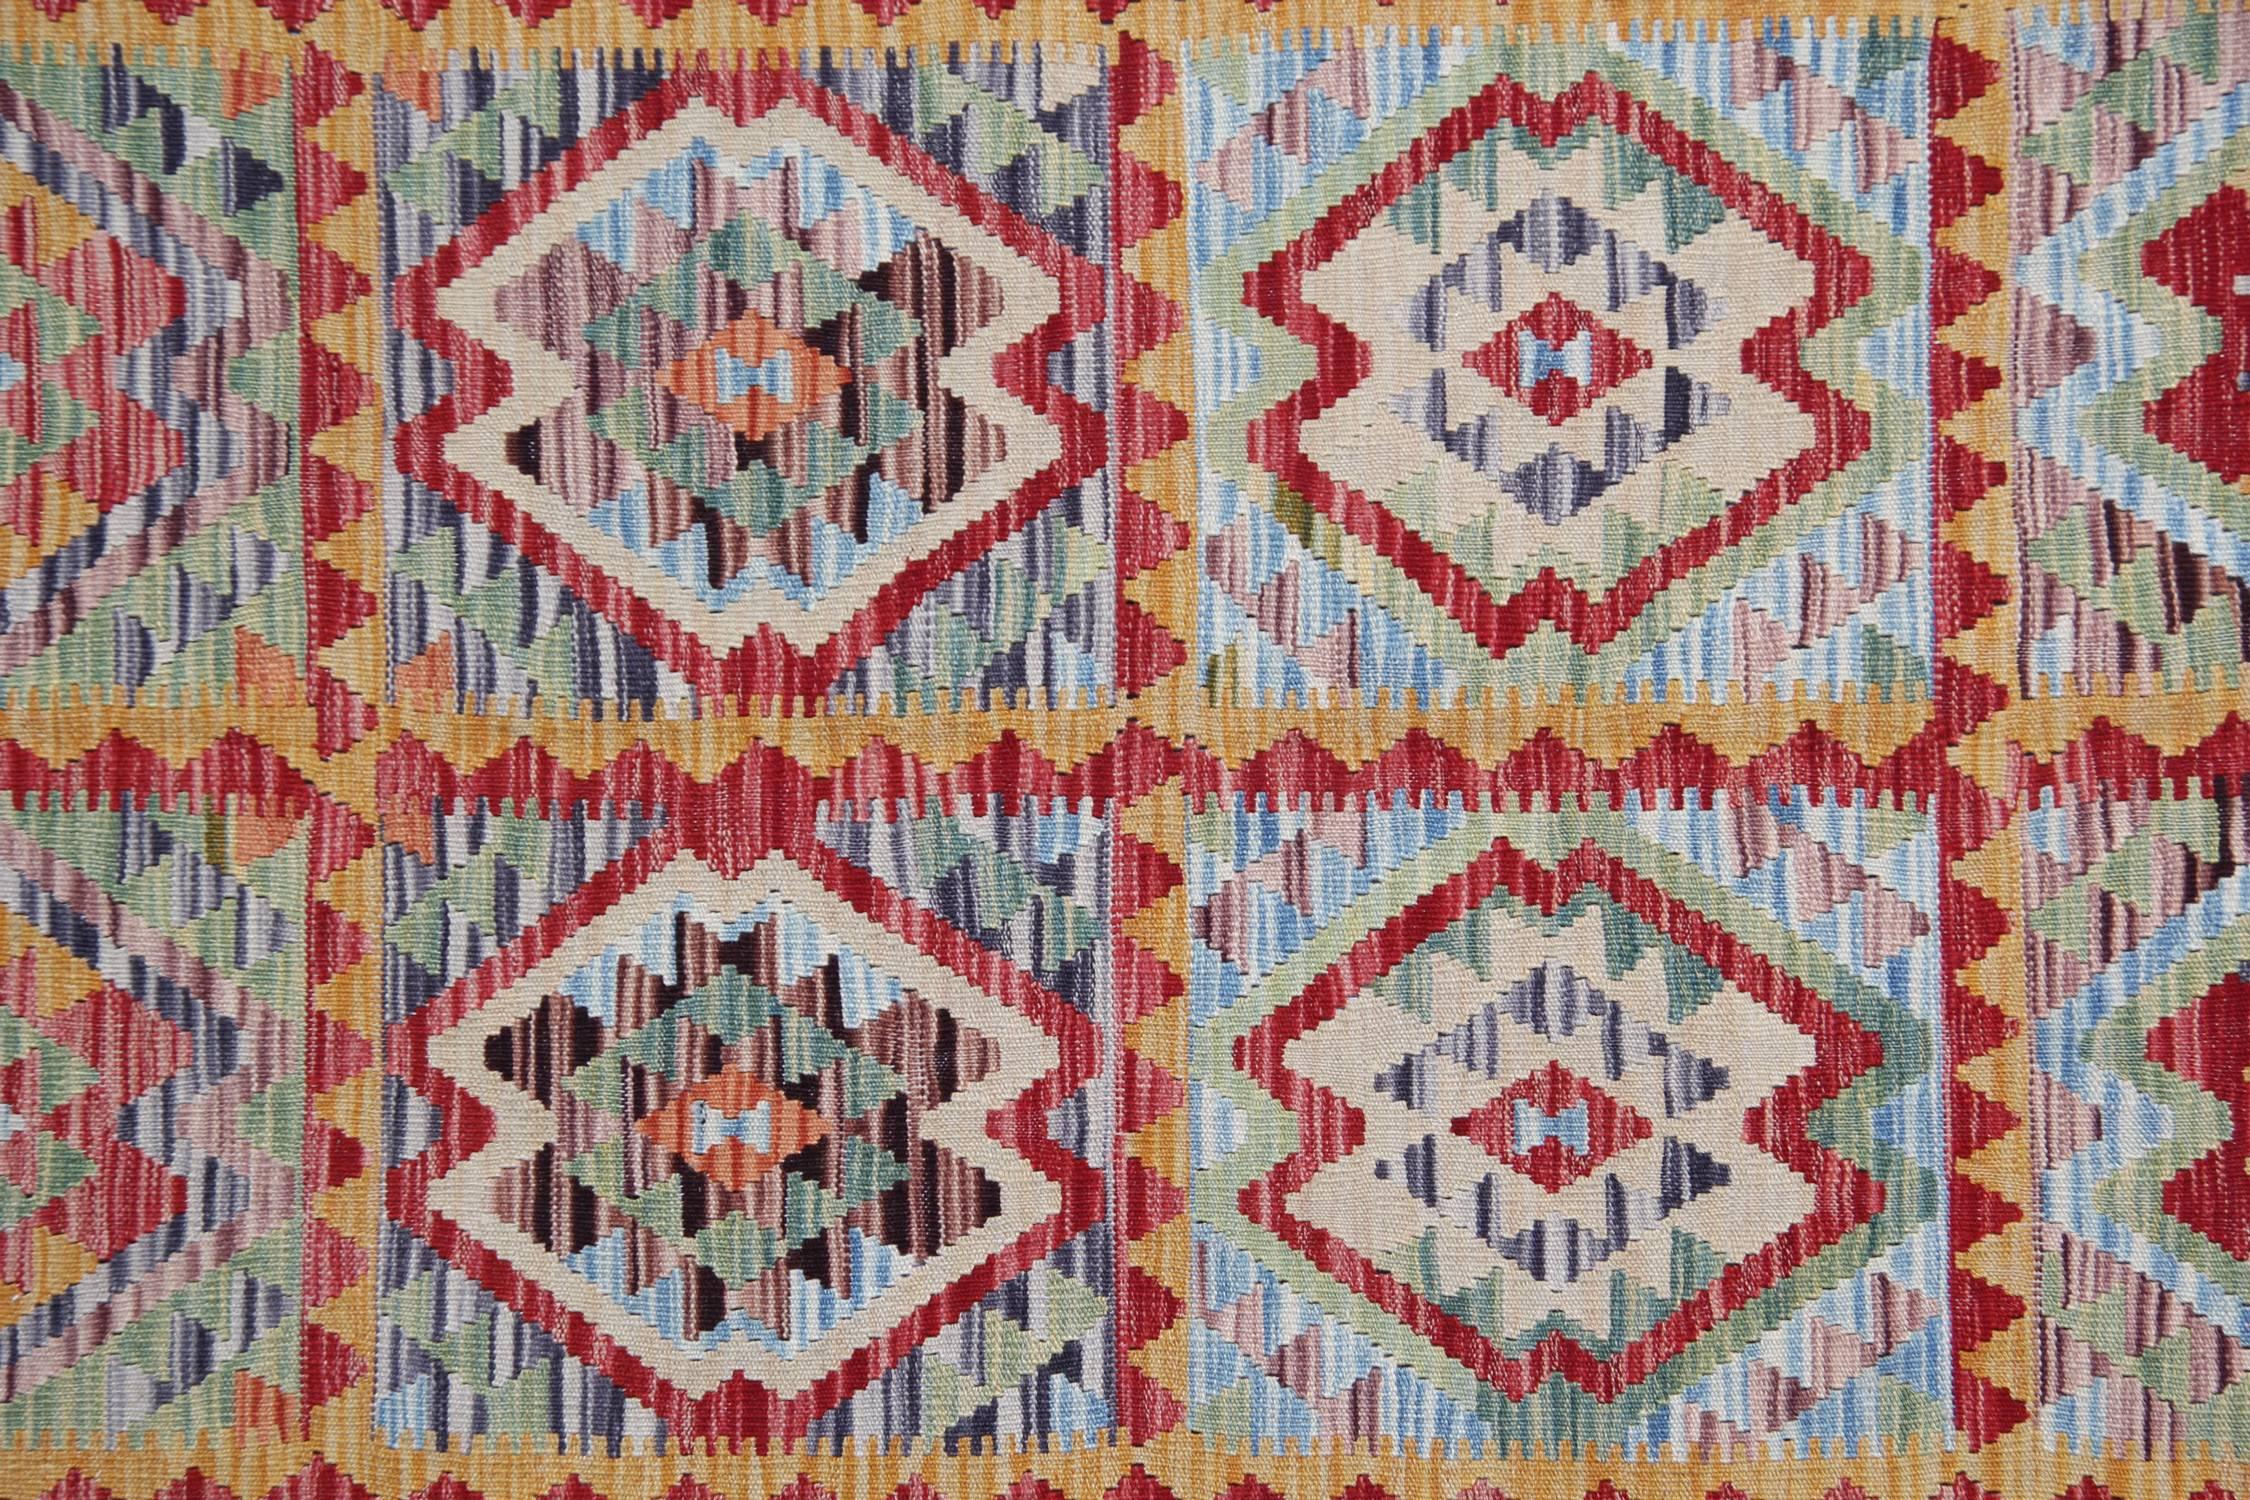 Vegetable Dyed Afghan Kilim Rugs with Light Green and Deep Red